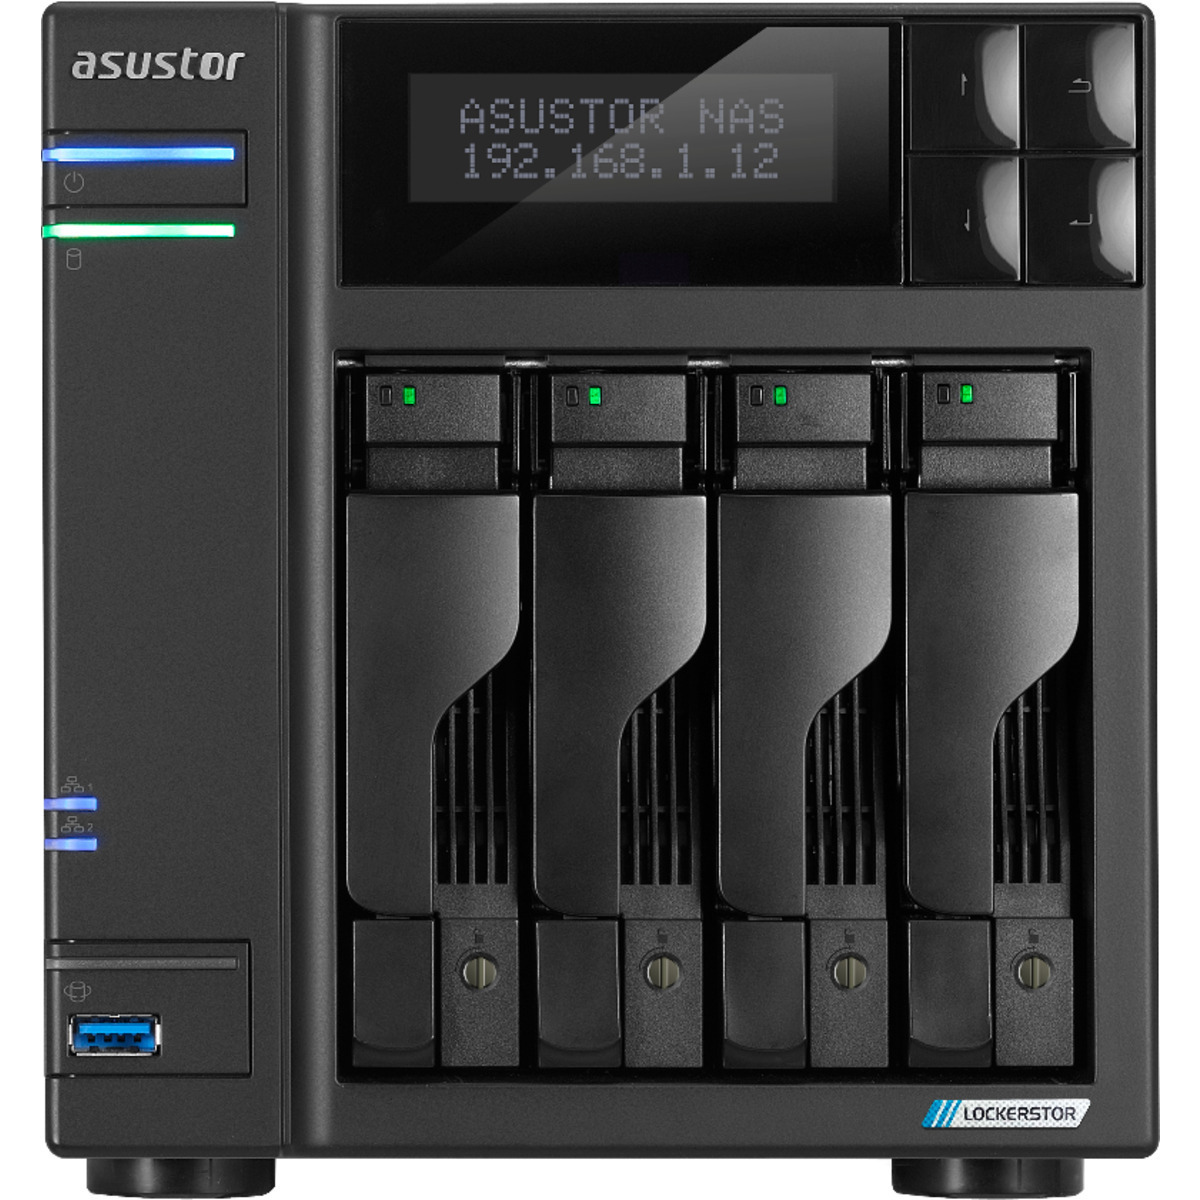 buy ASUSTOR LOCKERSTOR 4 Gen2 AS6704T 80tb Desktop NAS - Network Attached Storage Device 4x20000gb Western Digital Ultrastar HC560 WUH722020ALE6L4 3.5 7200rpm SATA 6Gb/s HDD ENTERPRISE Class Drives Installed - Burn-In Tested - FREE RAM UPGRADE - nas headquarters buy network attached storage server device das new raid-5 free shipping simply usa christmas holiday black friday cyber monday week sale happening now! LOCKERSTOR 4 Gen2 AS6704T